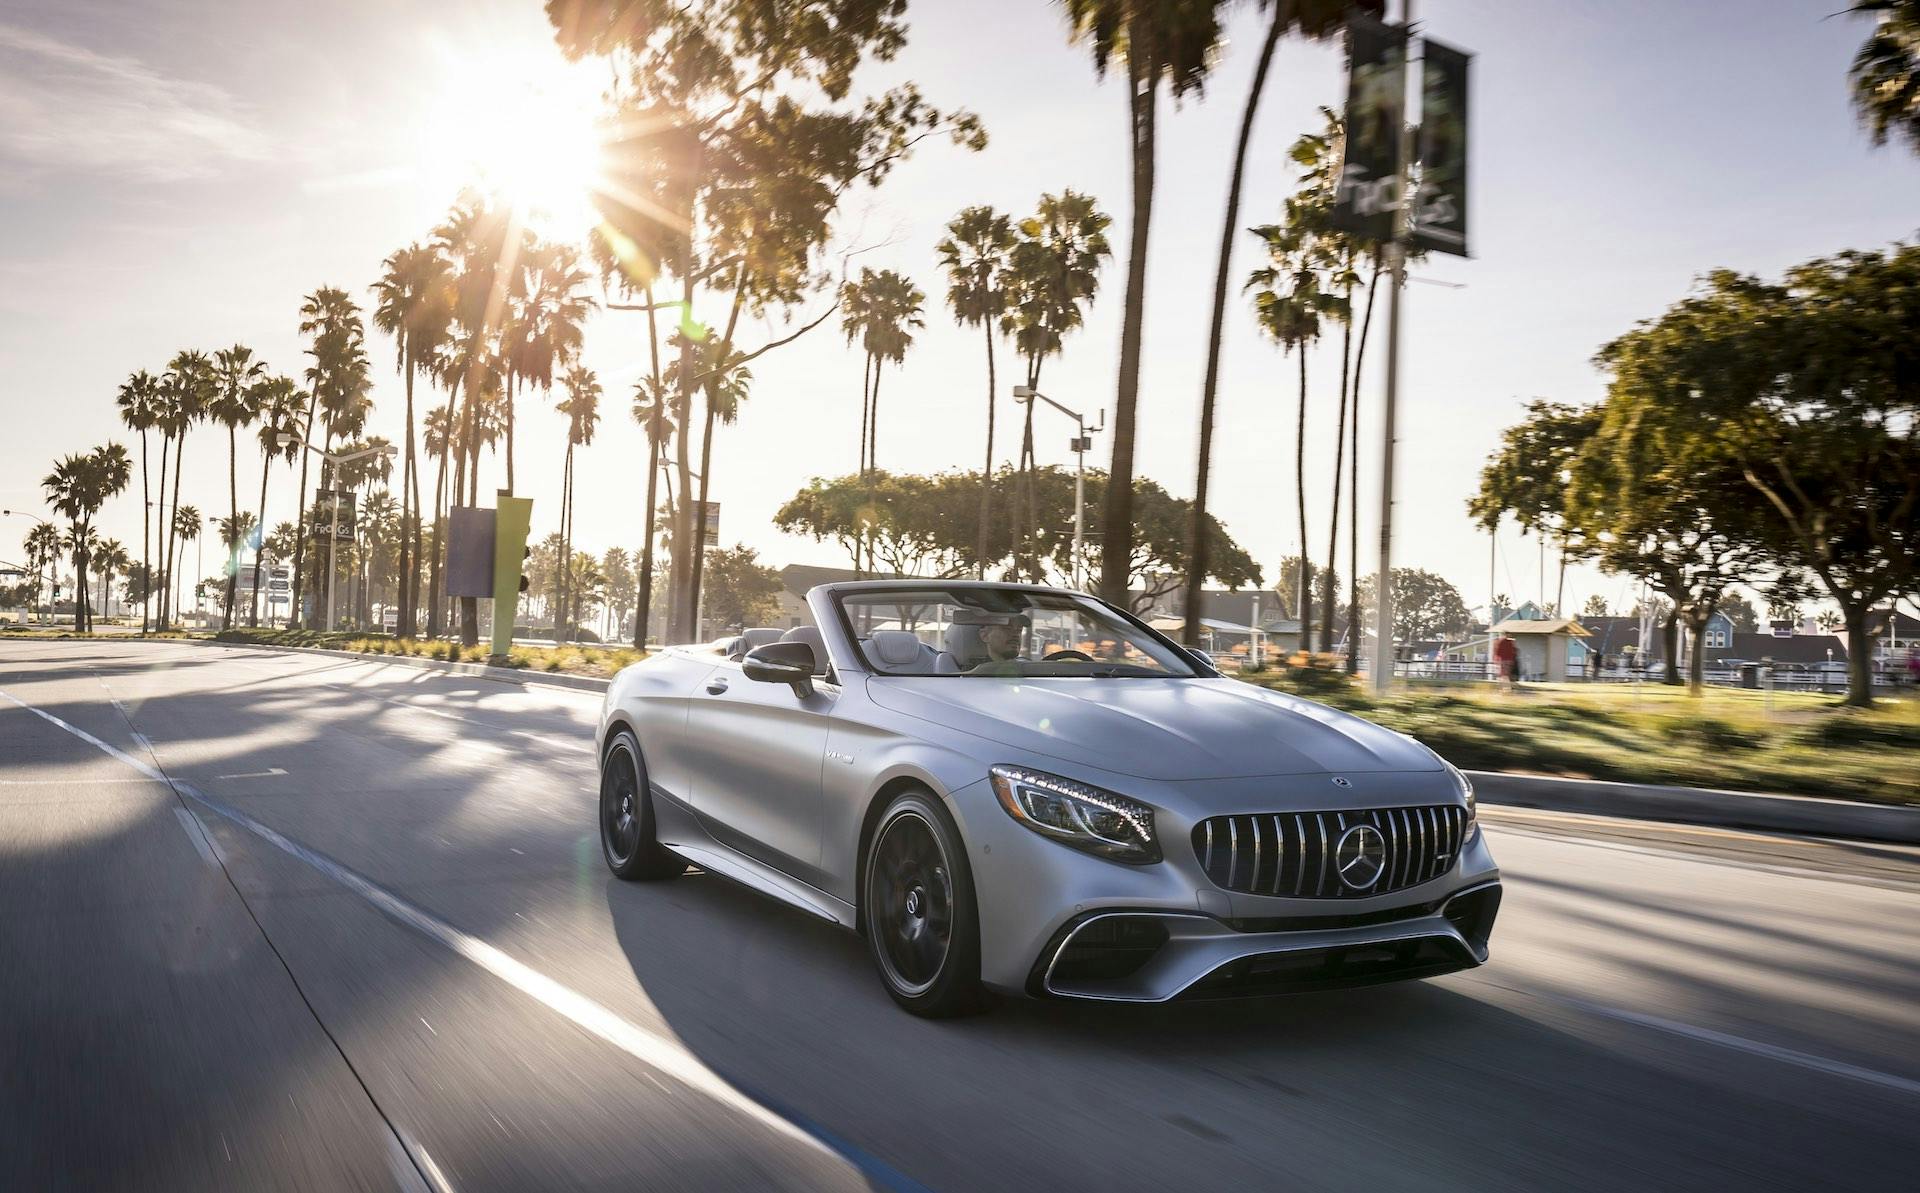 Mercedes-AMG S63 4MATIC+ Cabriolet